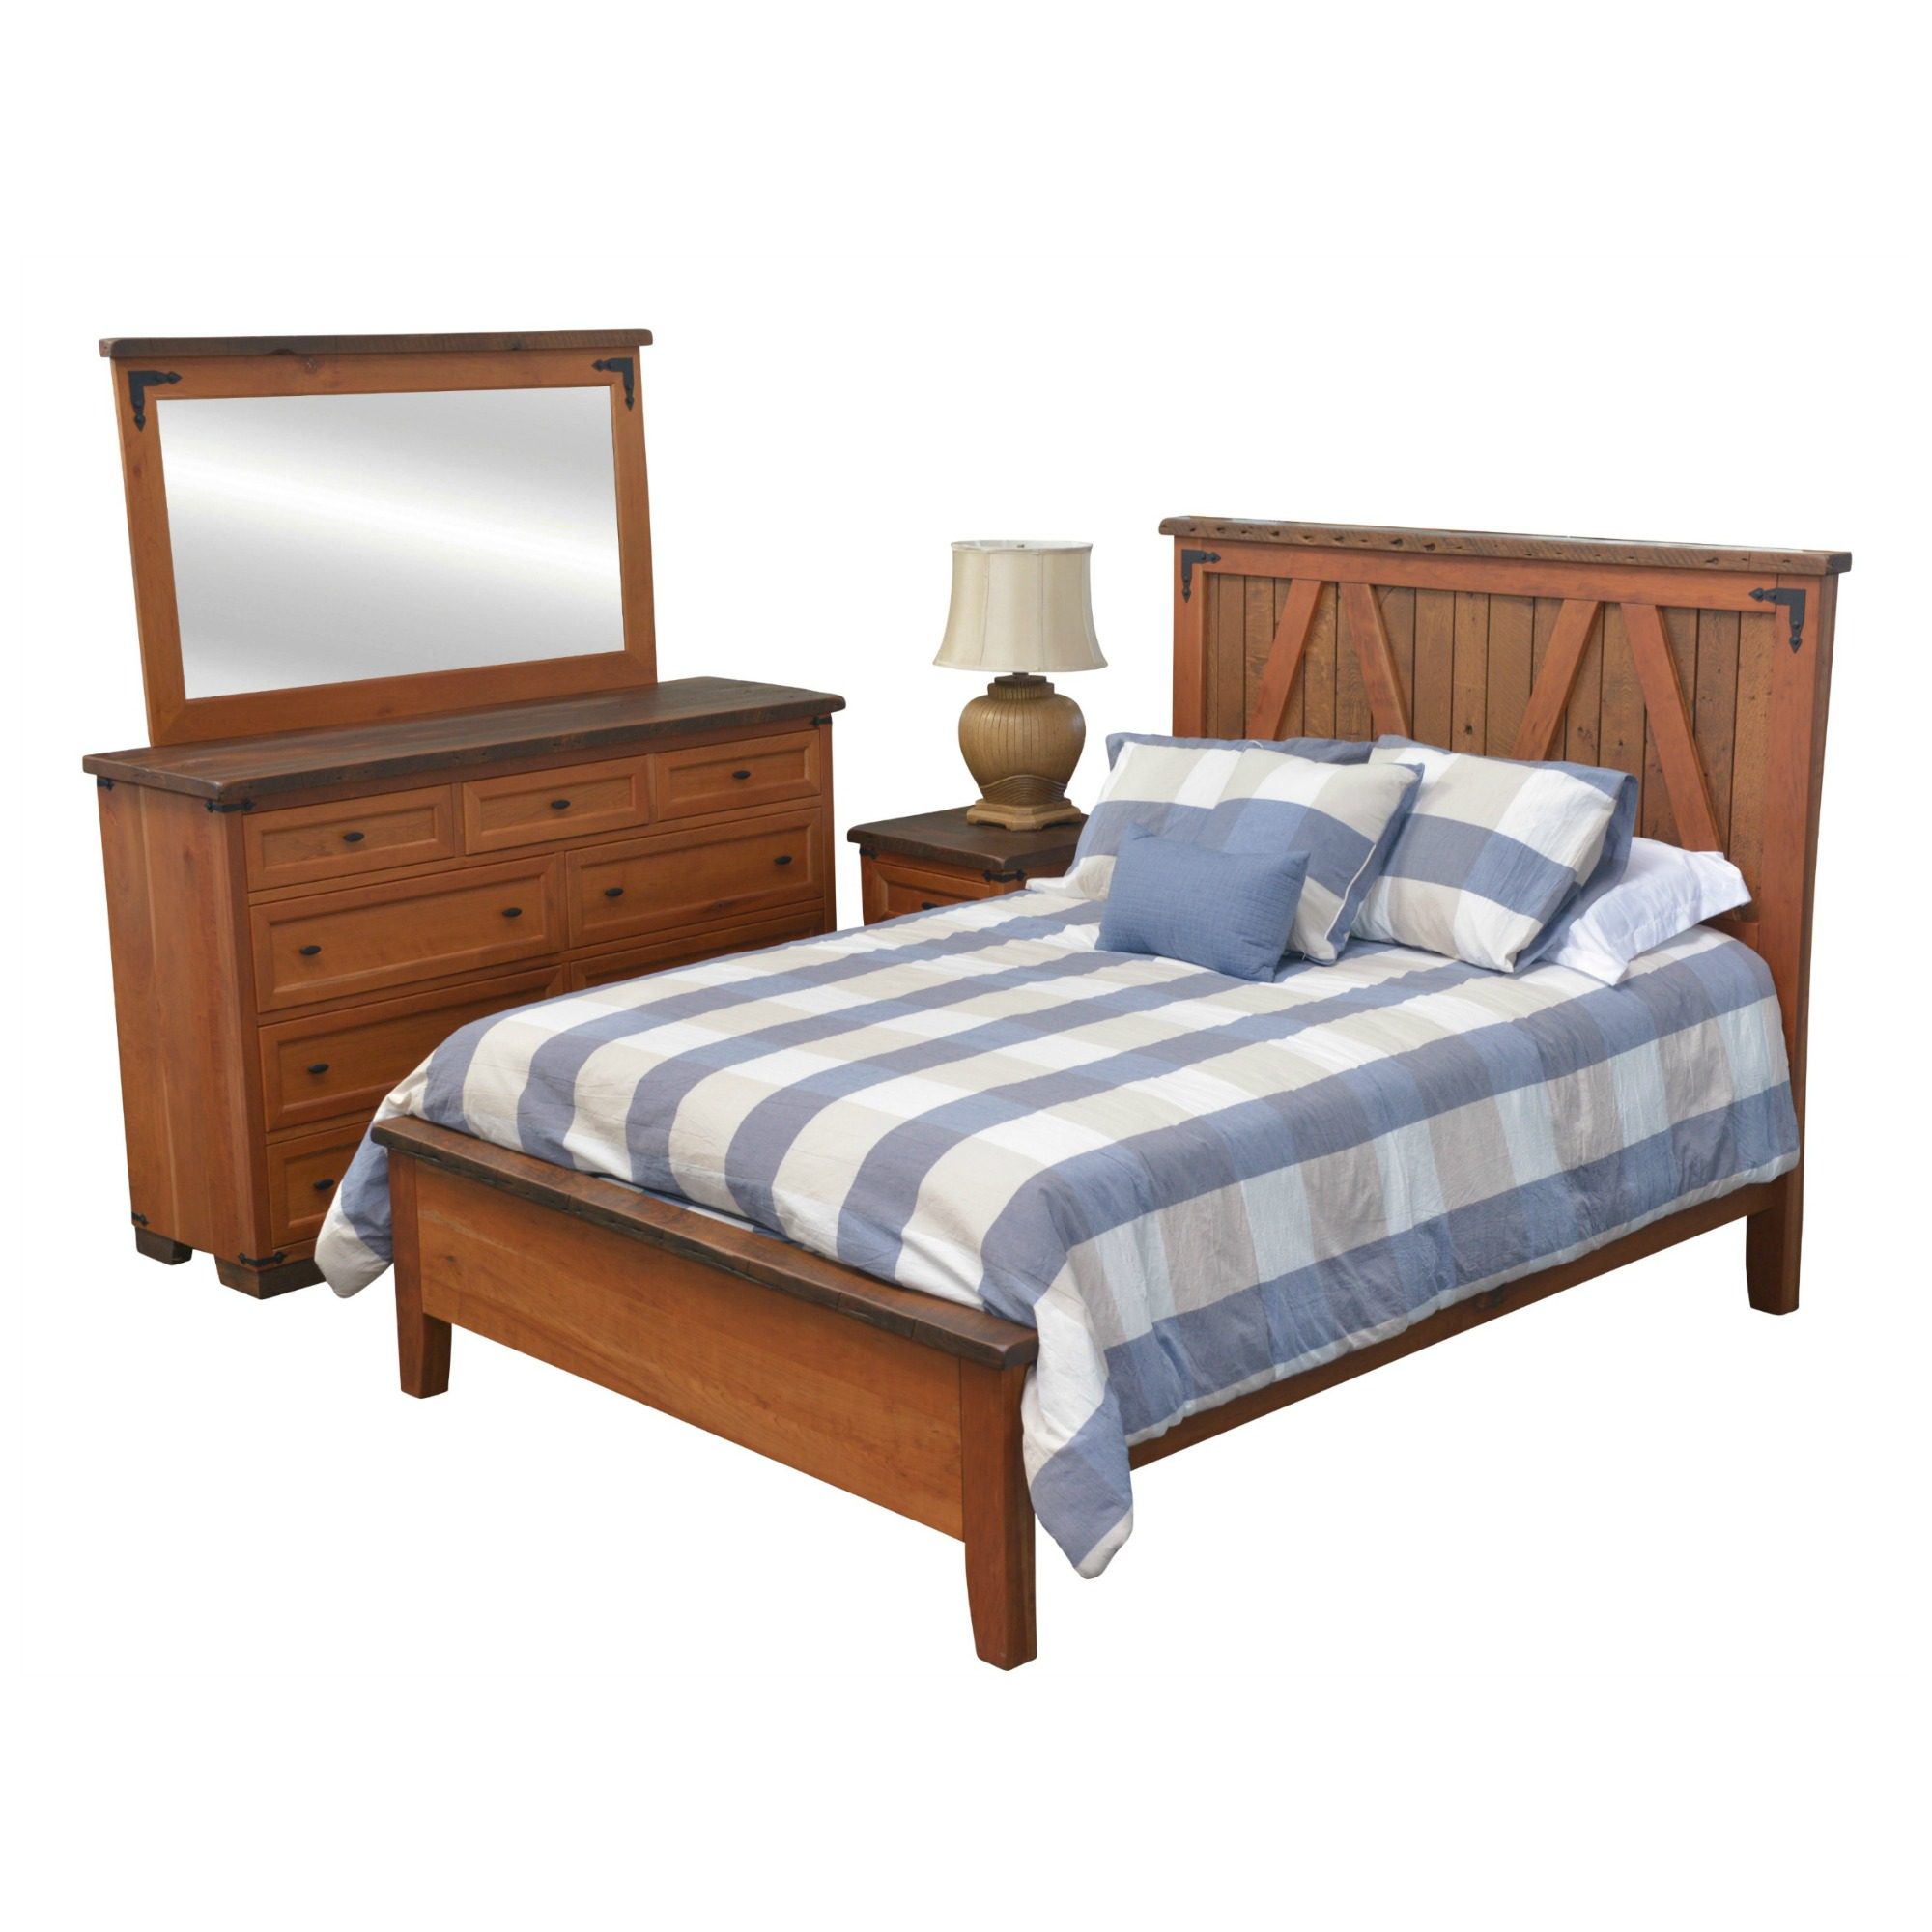 farmhouse-bedroom-collection-criswell